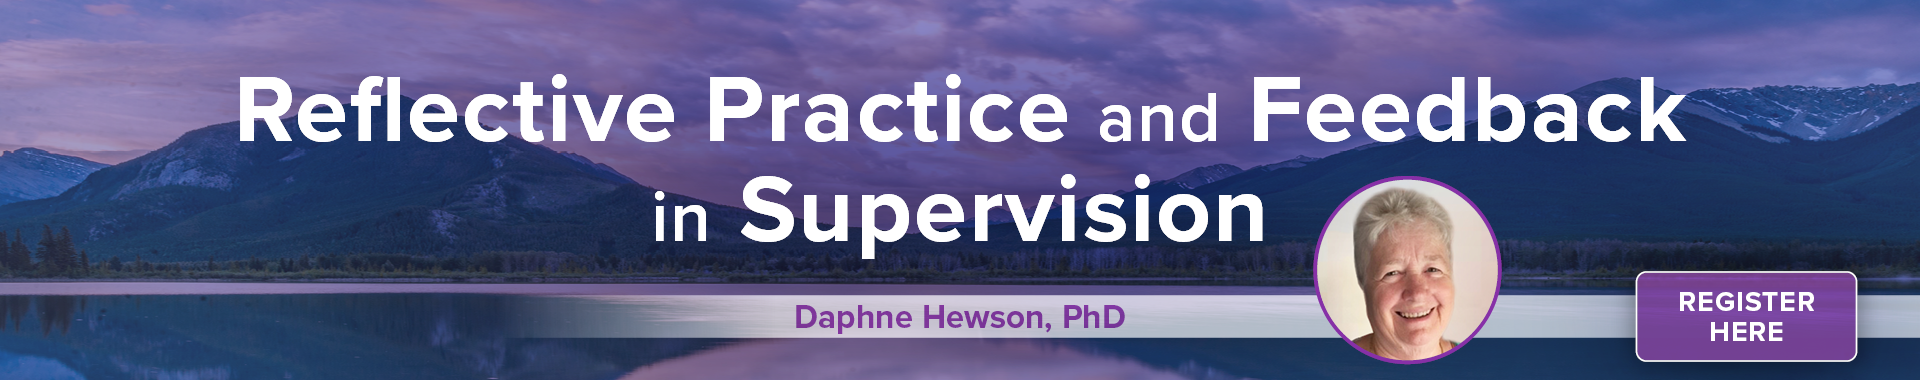 Reflective Practice and Feedback in Supervision